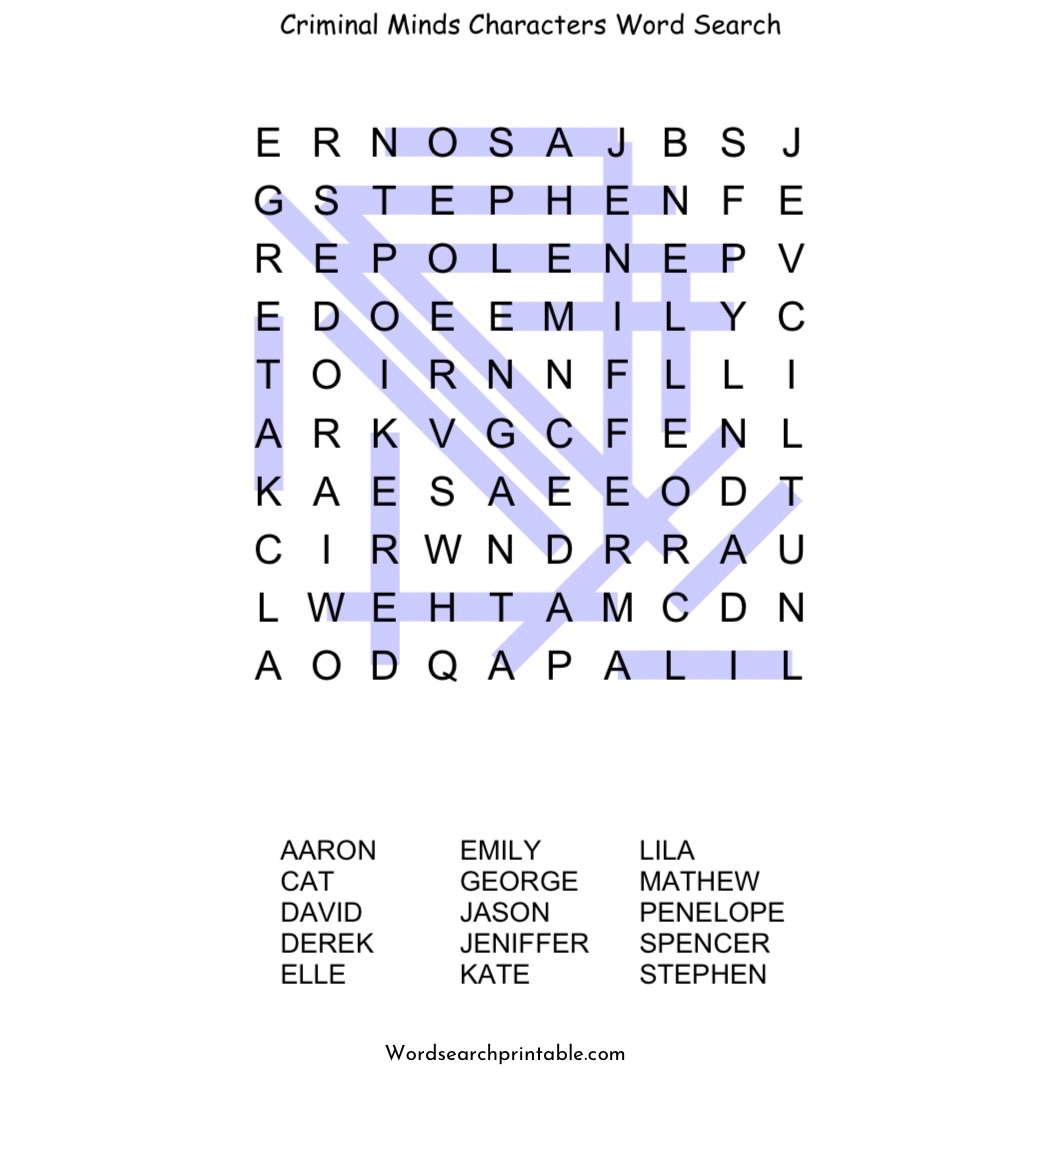 Criminal Minds Characters Word Search Solution